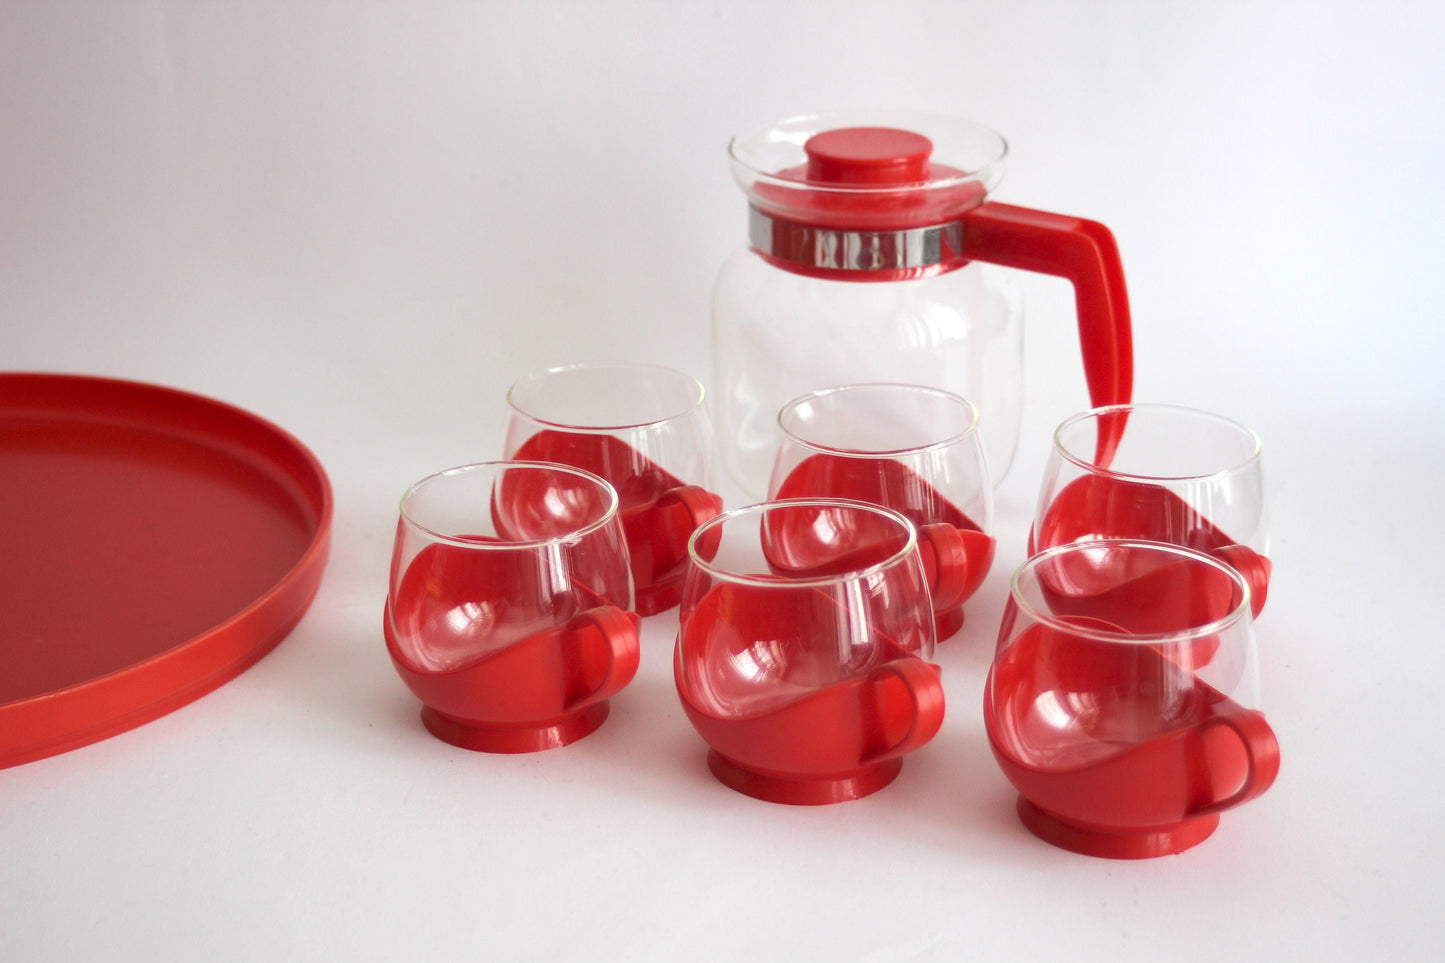 MELITTA GERMANY Set of 6 red glass tumblers for tea or coffee and pitcher with plastic handles - 60s / 70s